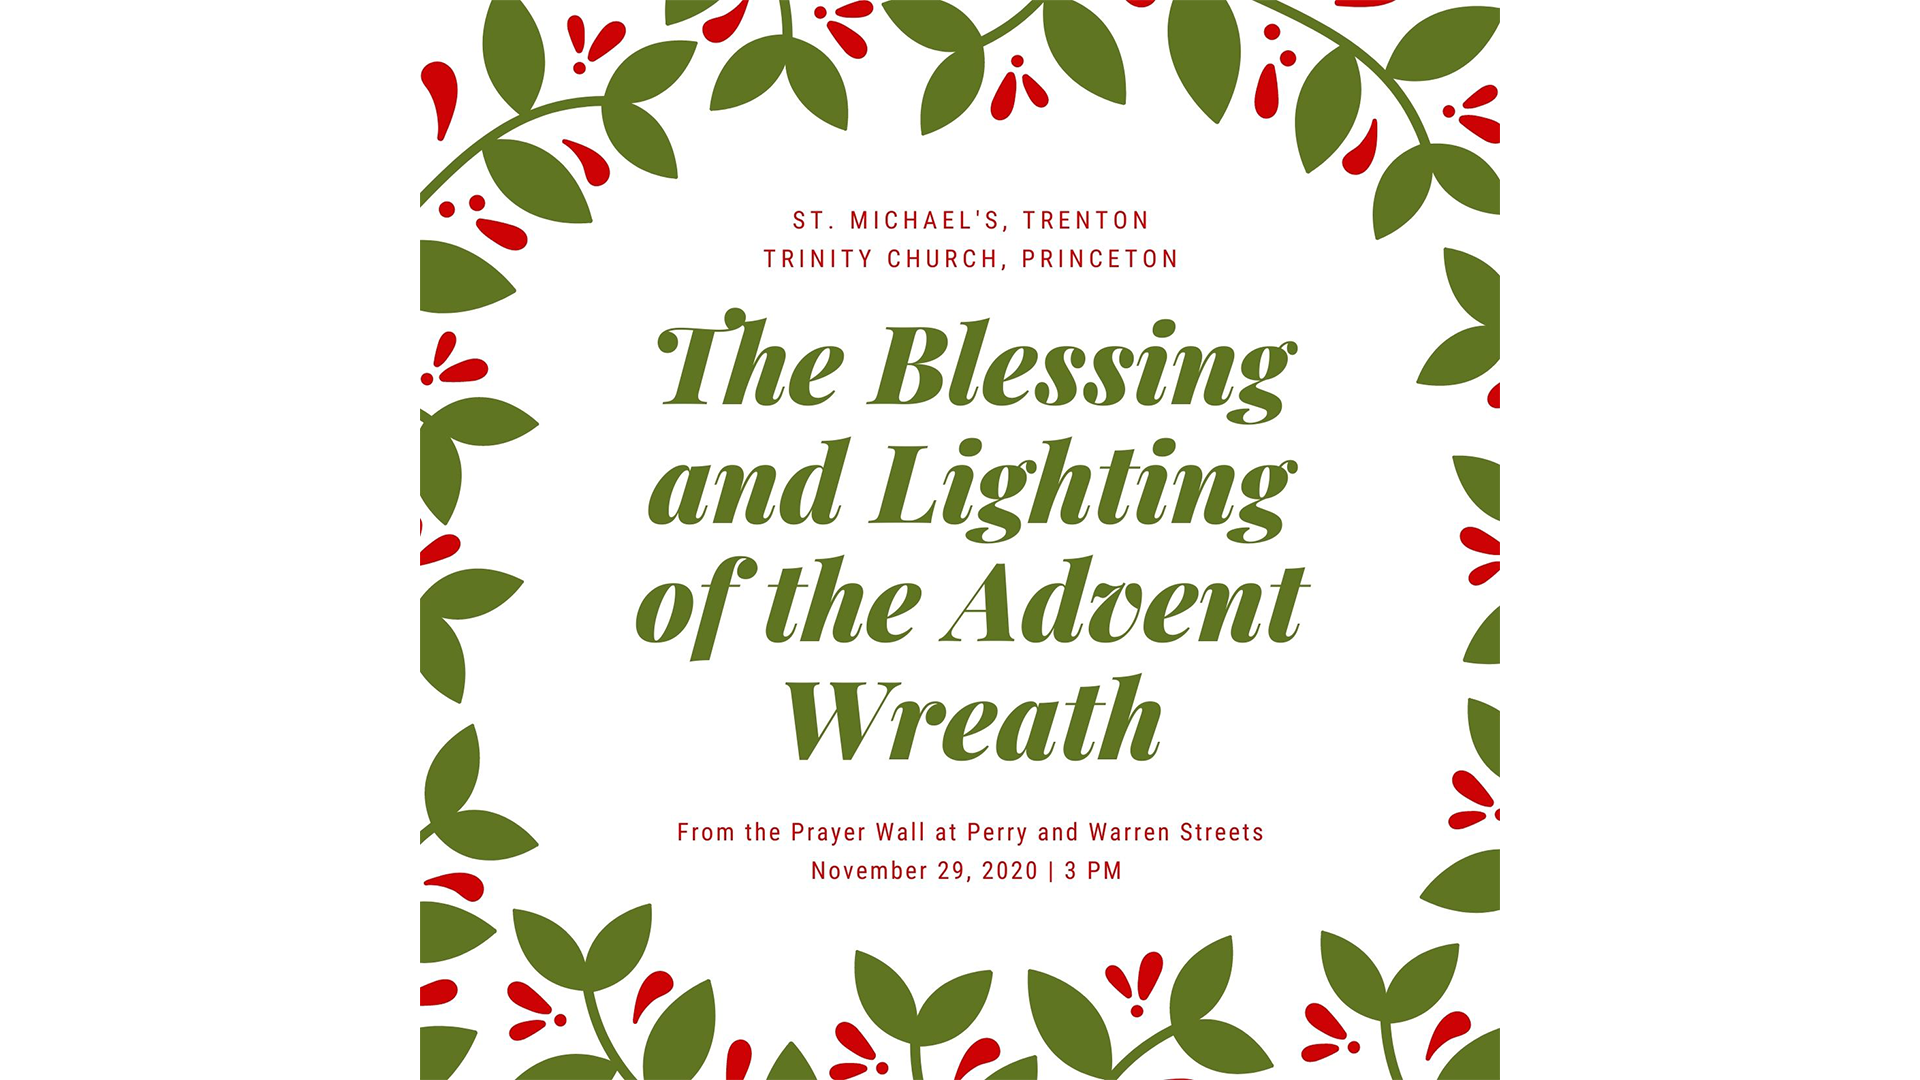 The Blessing and Lighting of the Advent Wreath